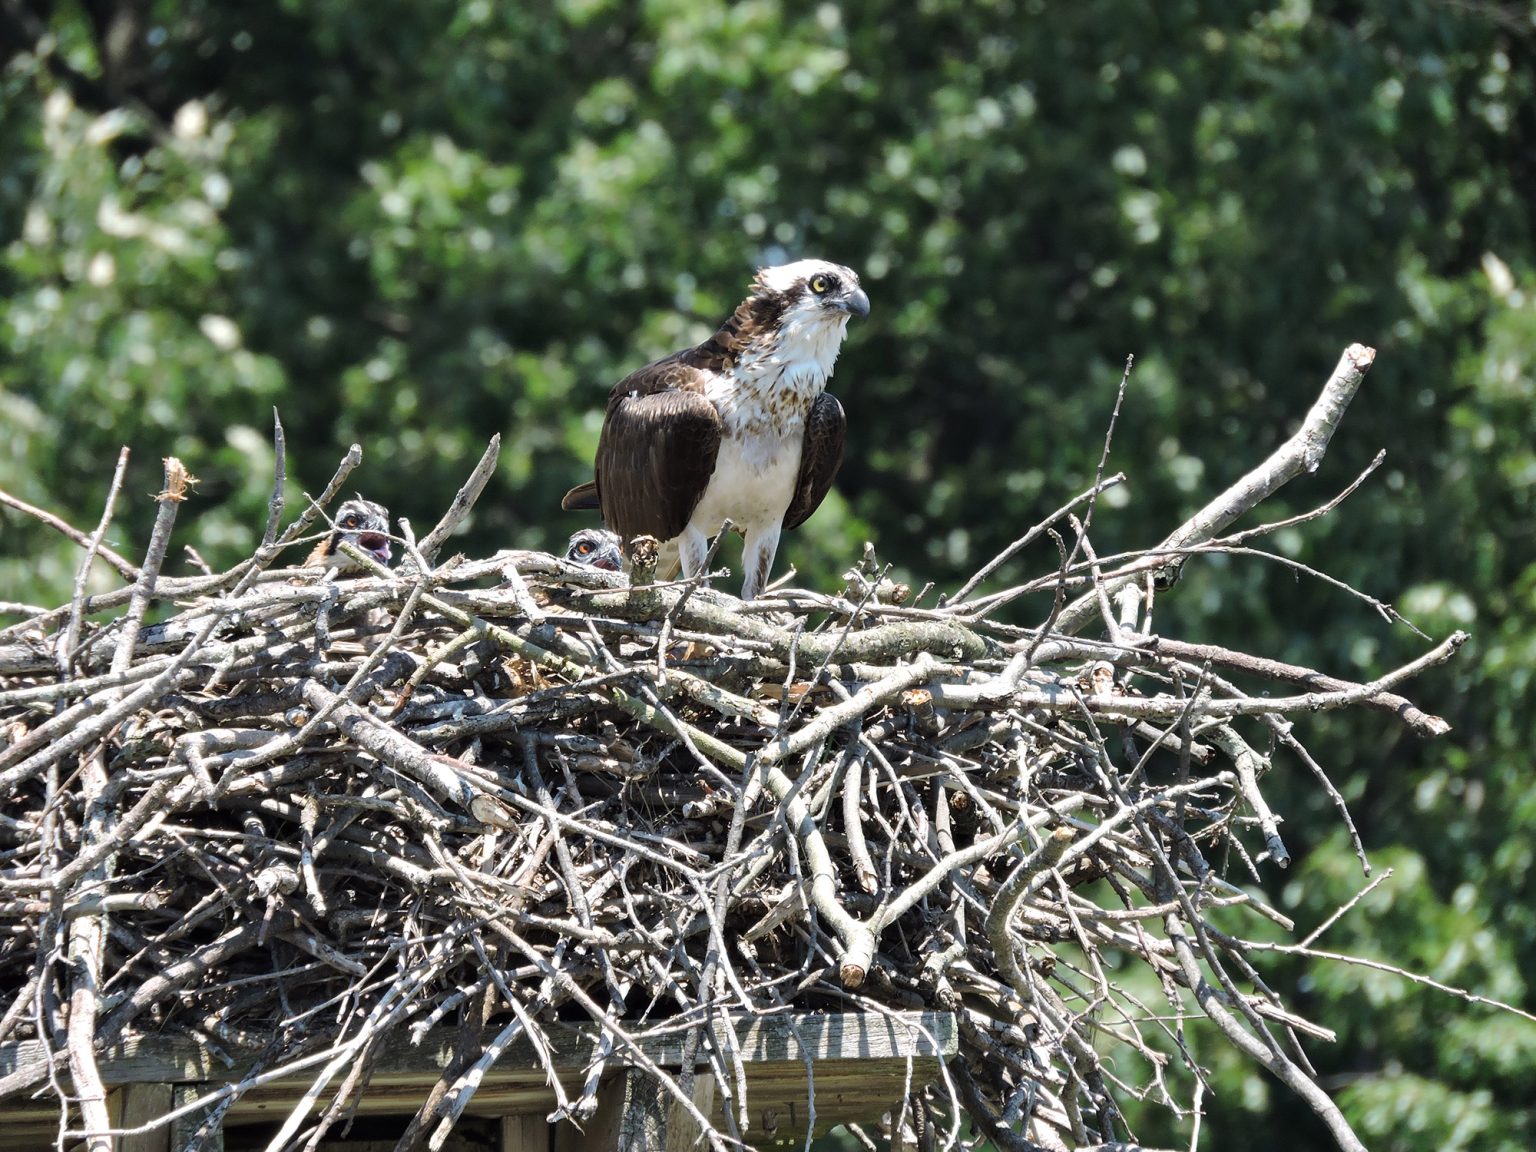 Osprey on the Nest with Two Chicks